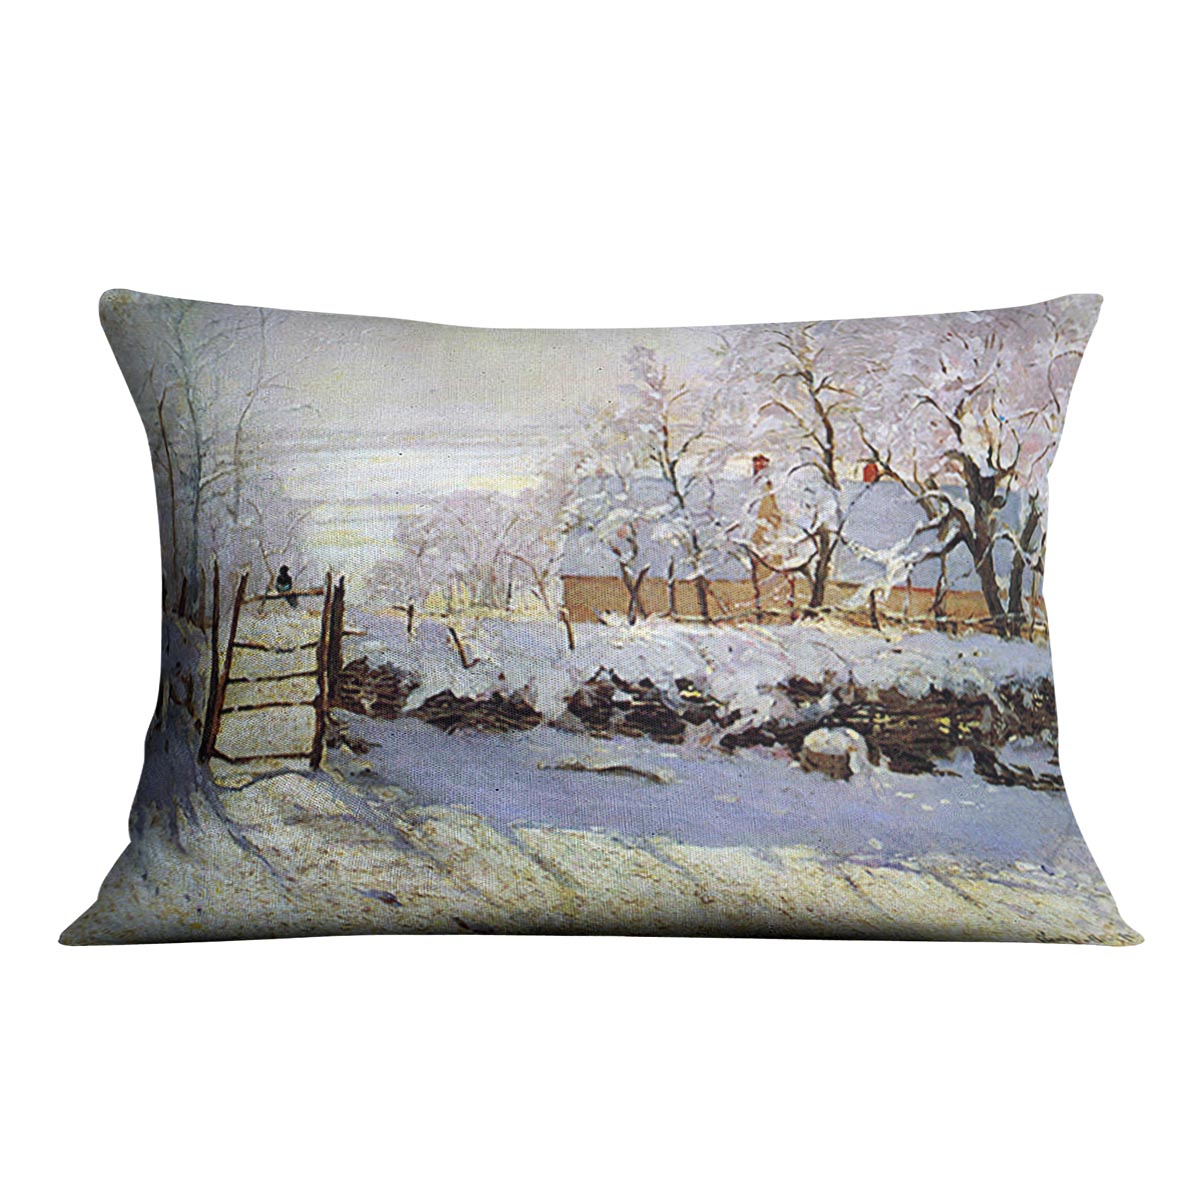 The Magpie by Monet Cushion